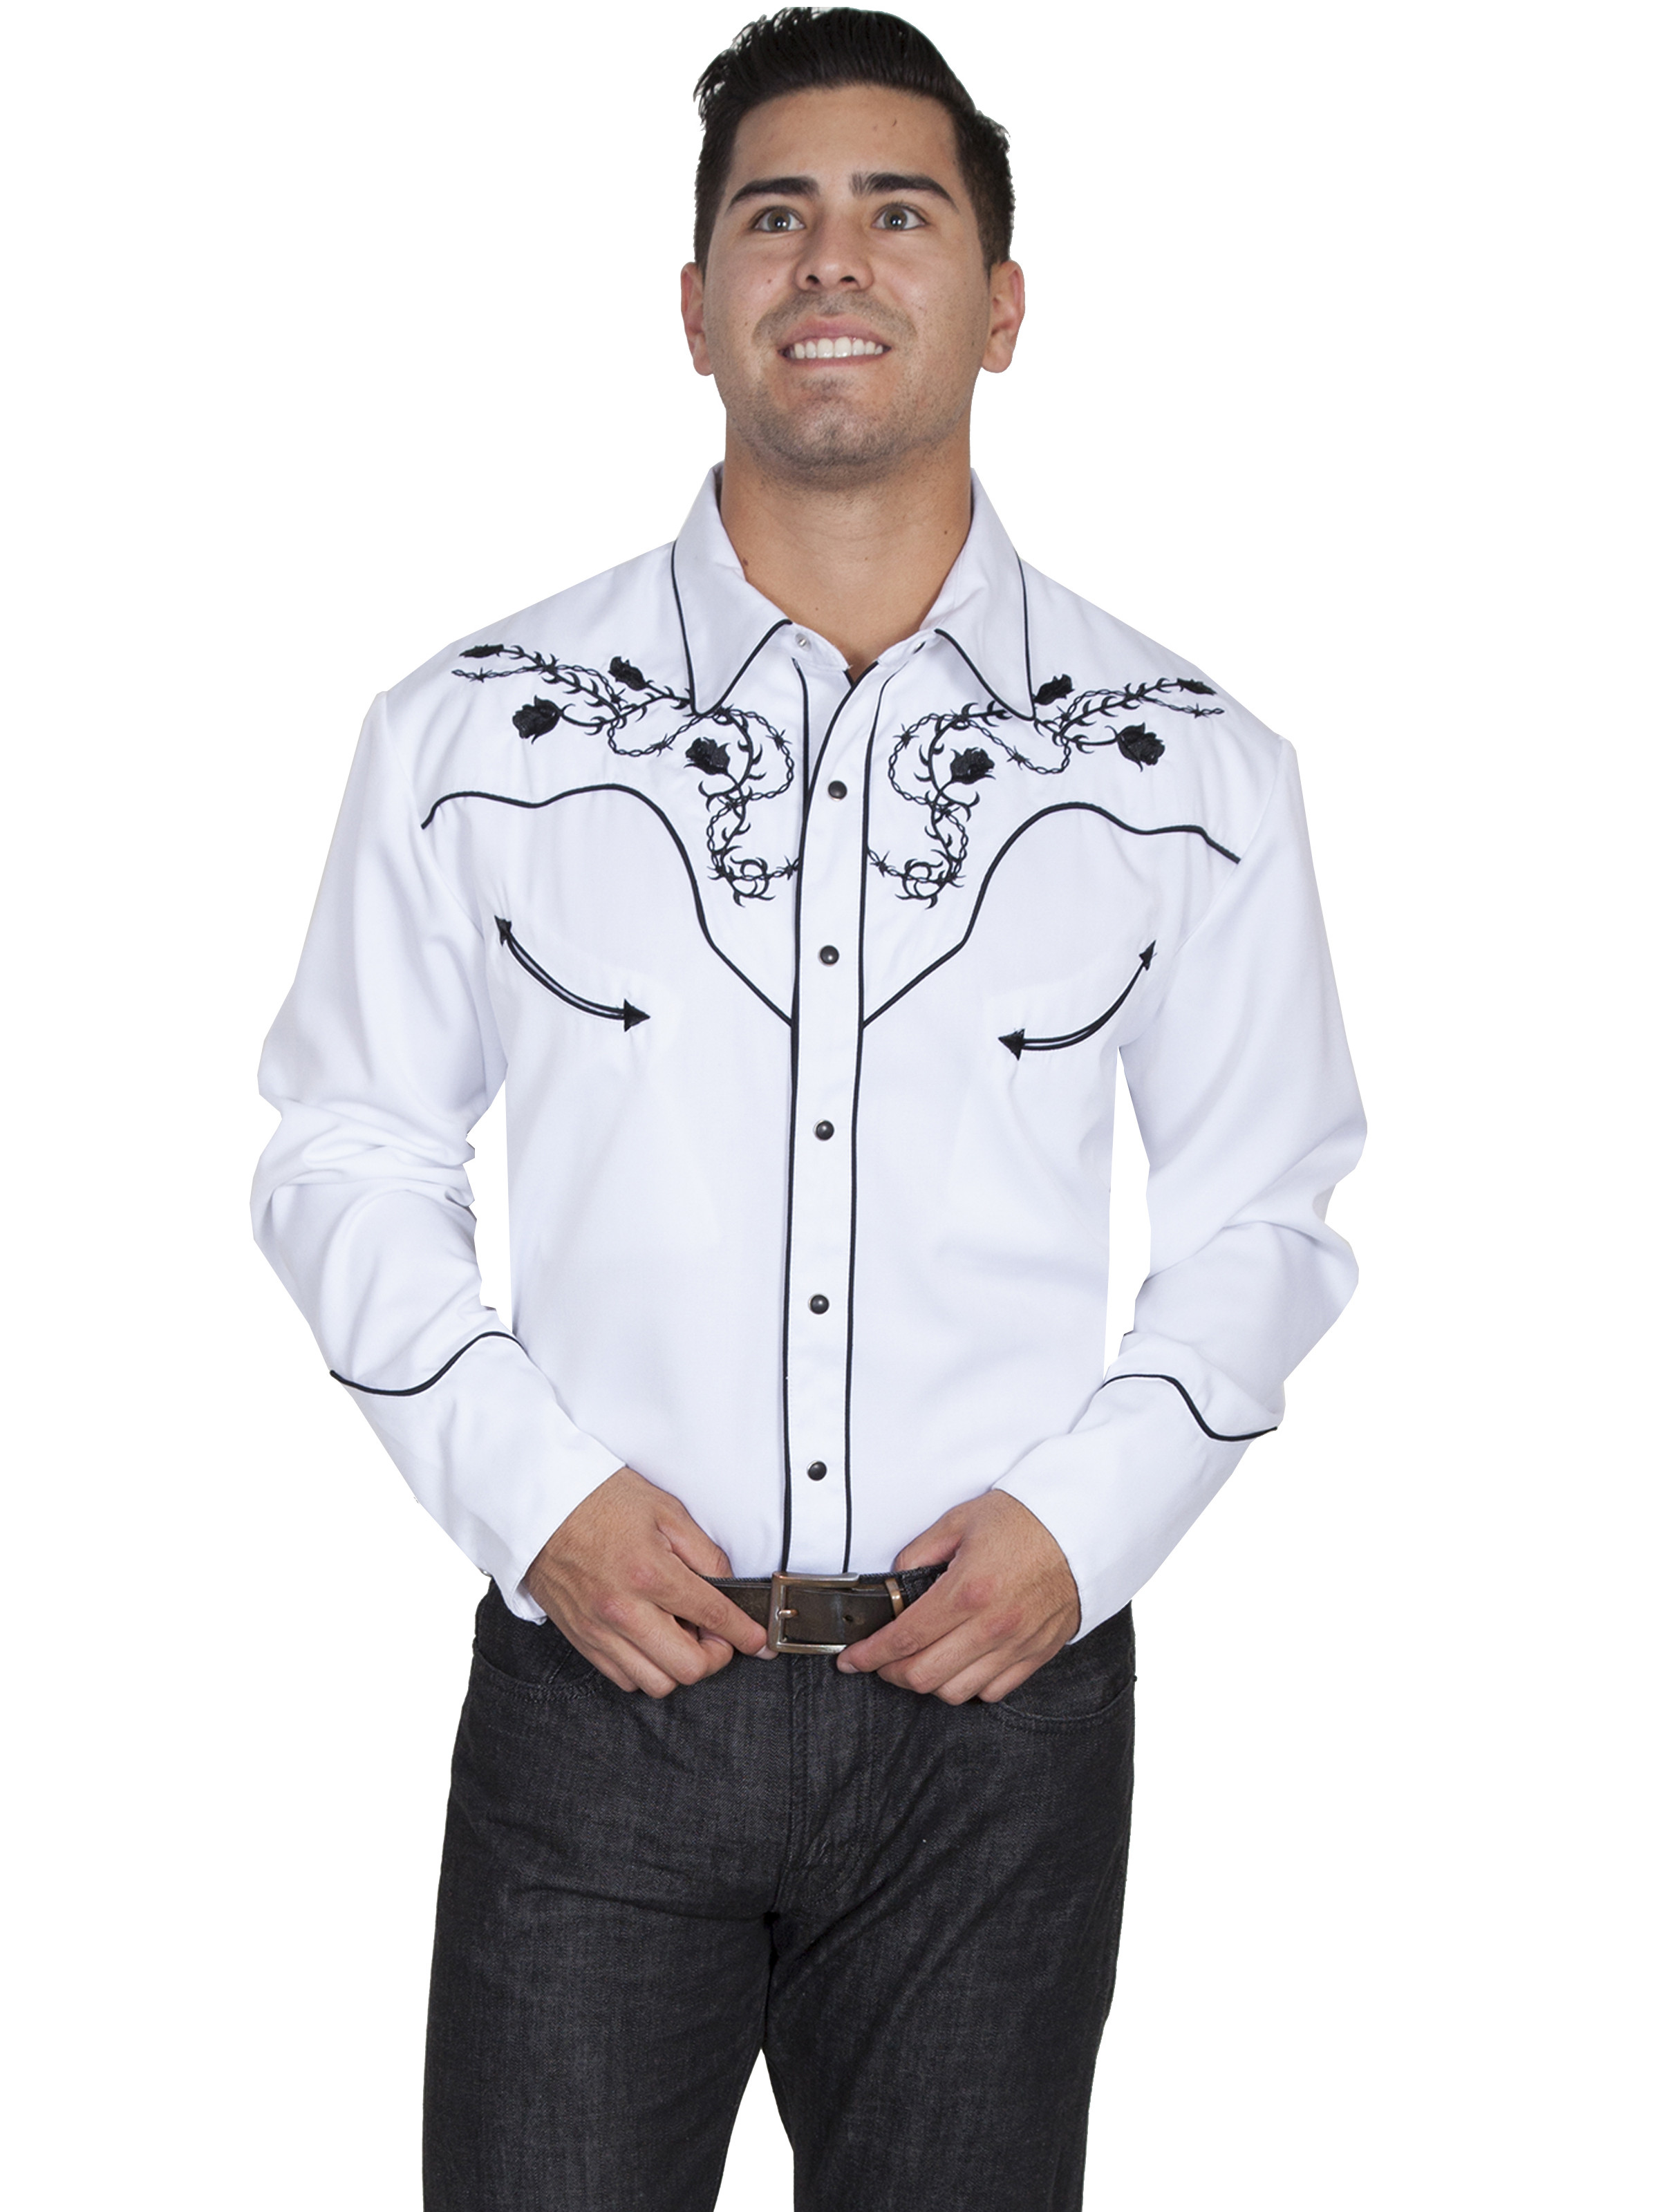 heymoney Mens Western Cowboy Embroidered Long Sleeve Button Down Shirt Tops Blouses